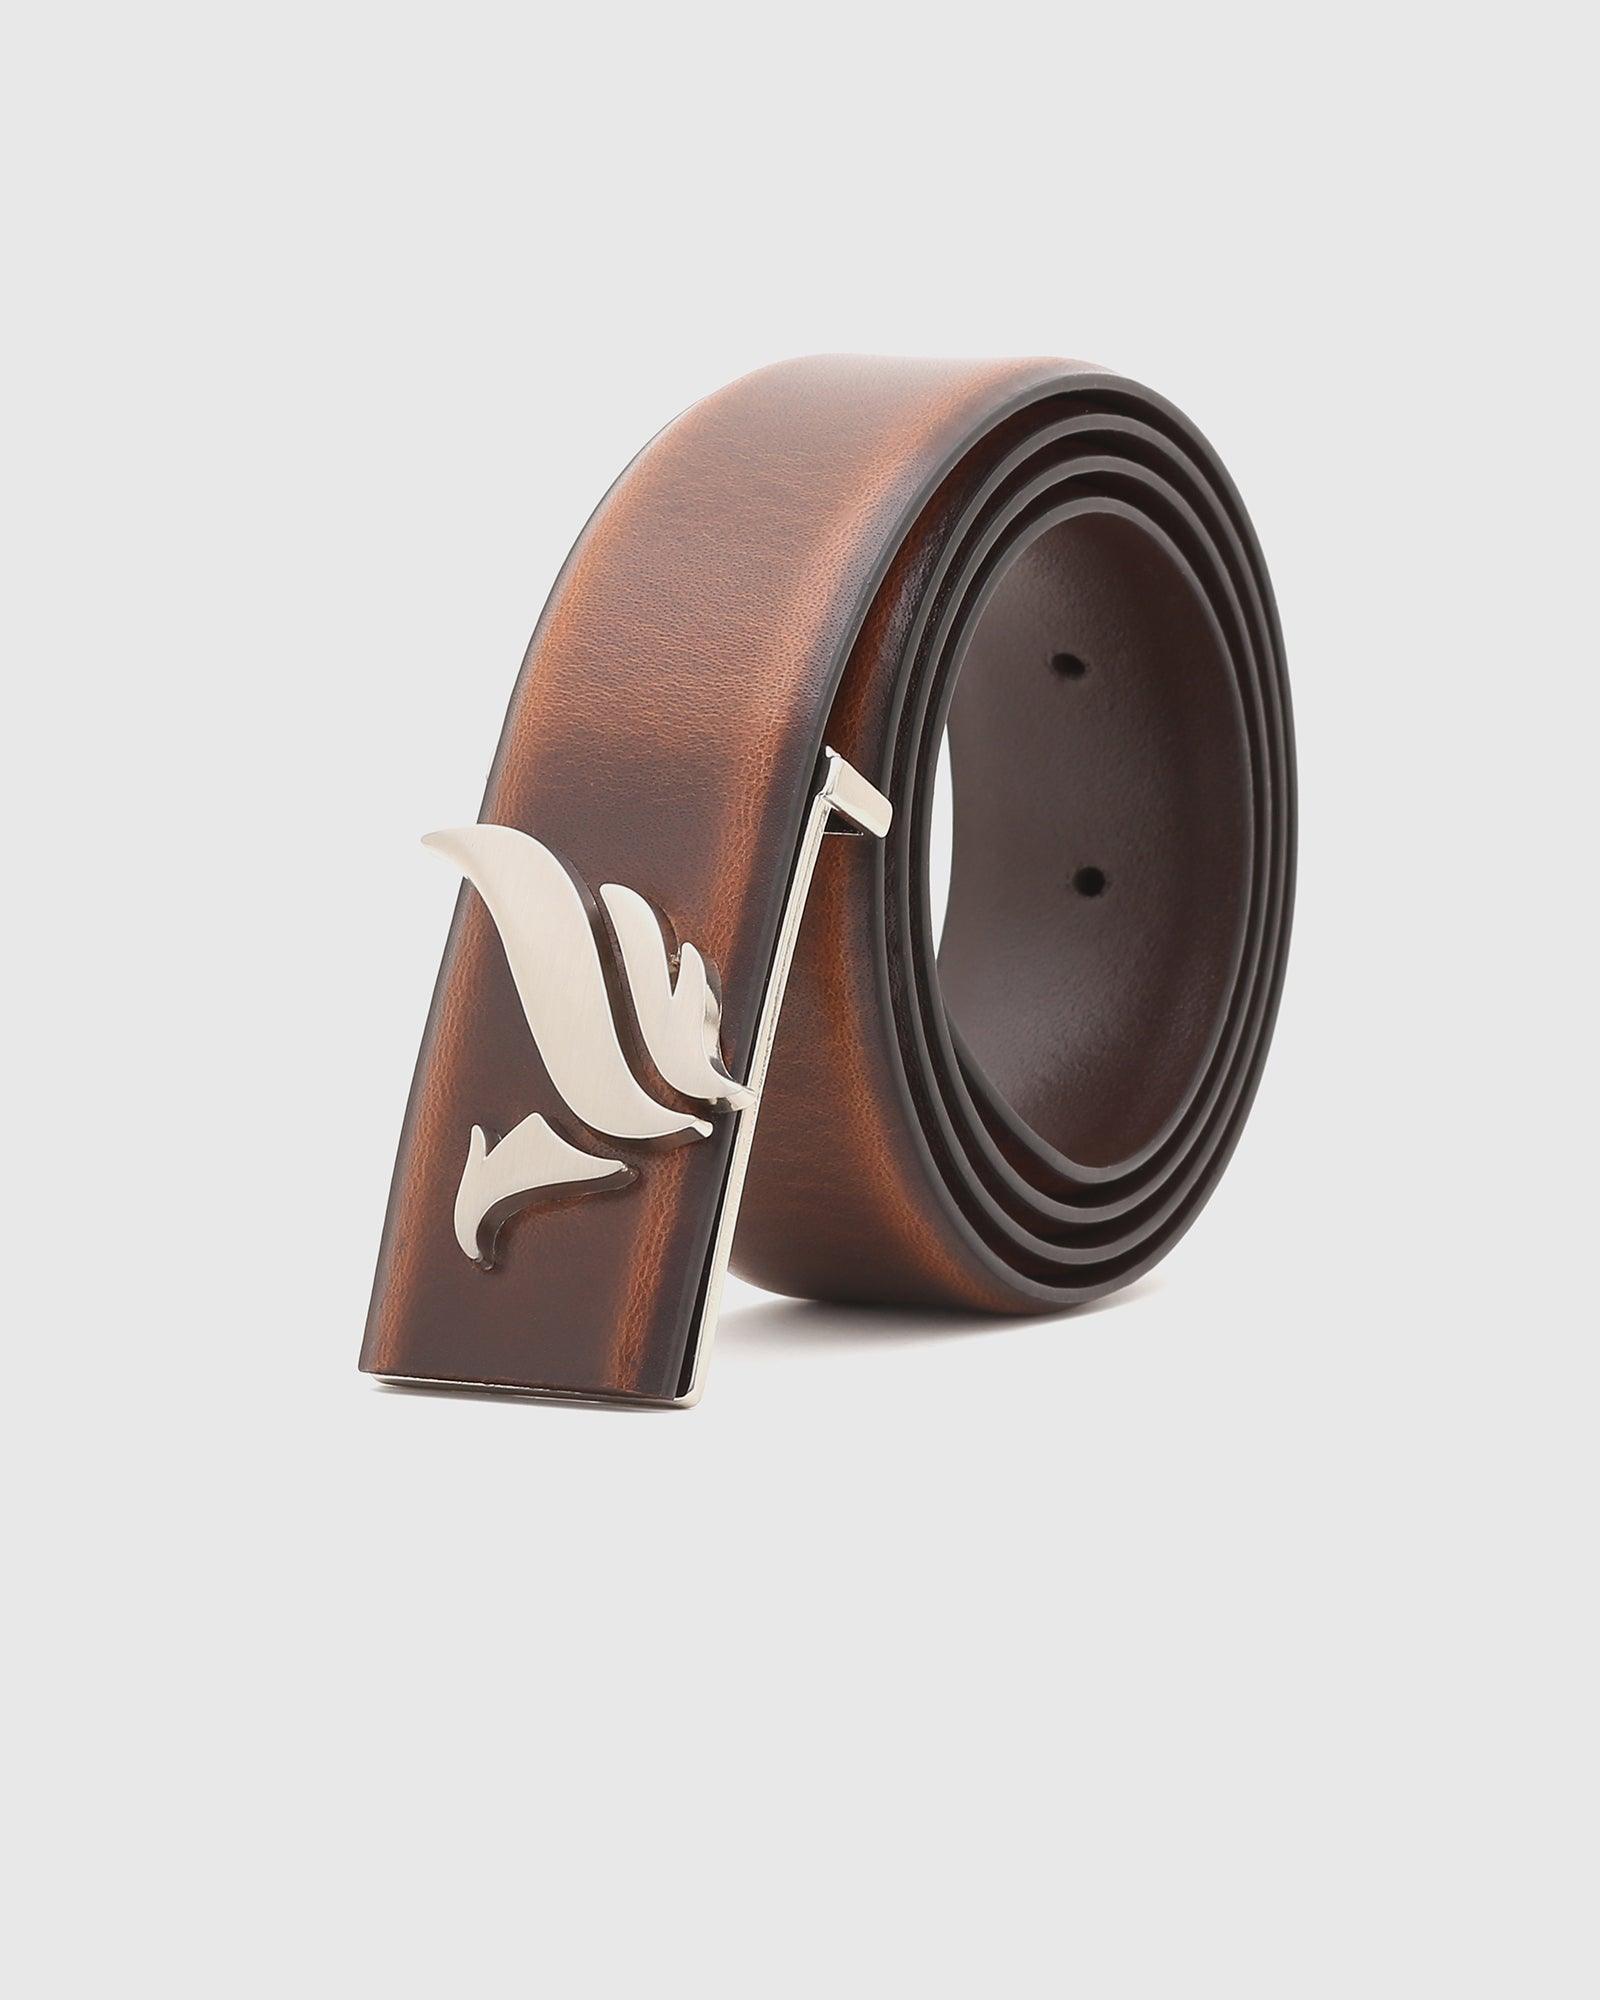 Must Haves Leather Tan Textured Belt - New Halley